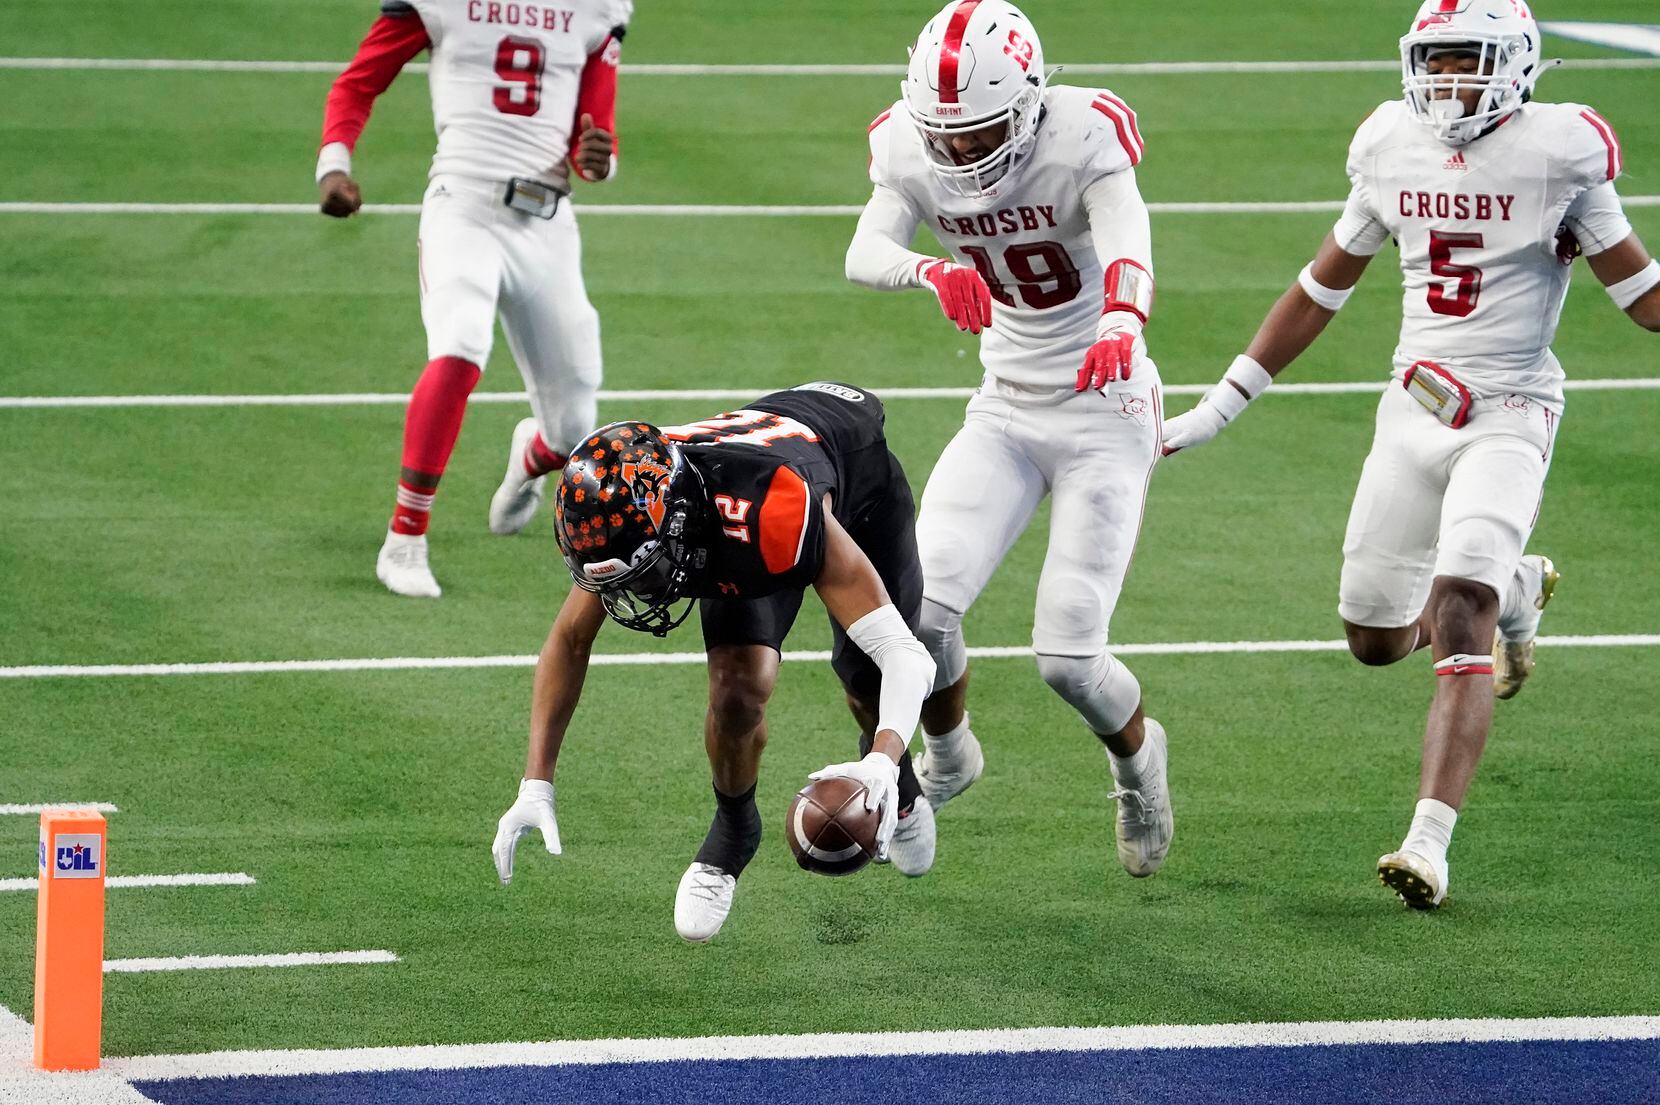 Aledo wide receiver Brian Fleming (12) scores on a 20-yard touchdown reception during the second half of a 56-21 victory over Crosby to win the Class 5A Division II state football championship game at AT&T Stadium on Friday, Jan. 15, 2021, in Arlington. The victory gave the Bearcats the 10th state championship in school history. (Smiley N. Pool/The Dallas Morning News)